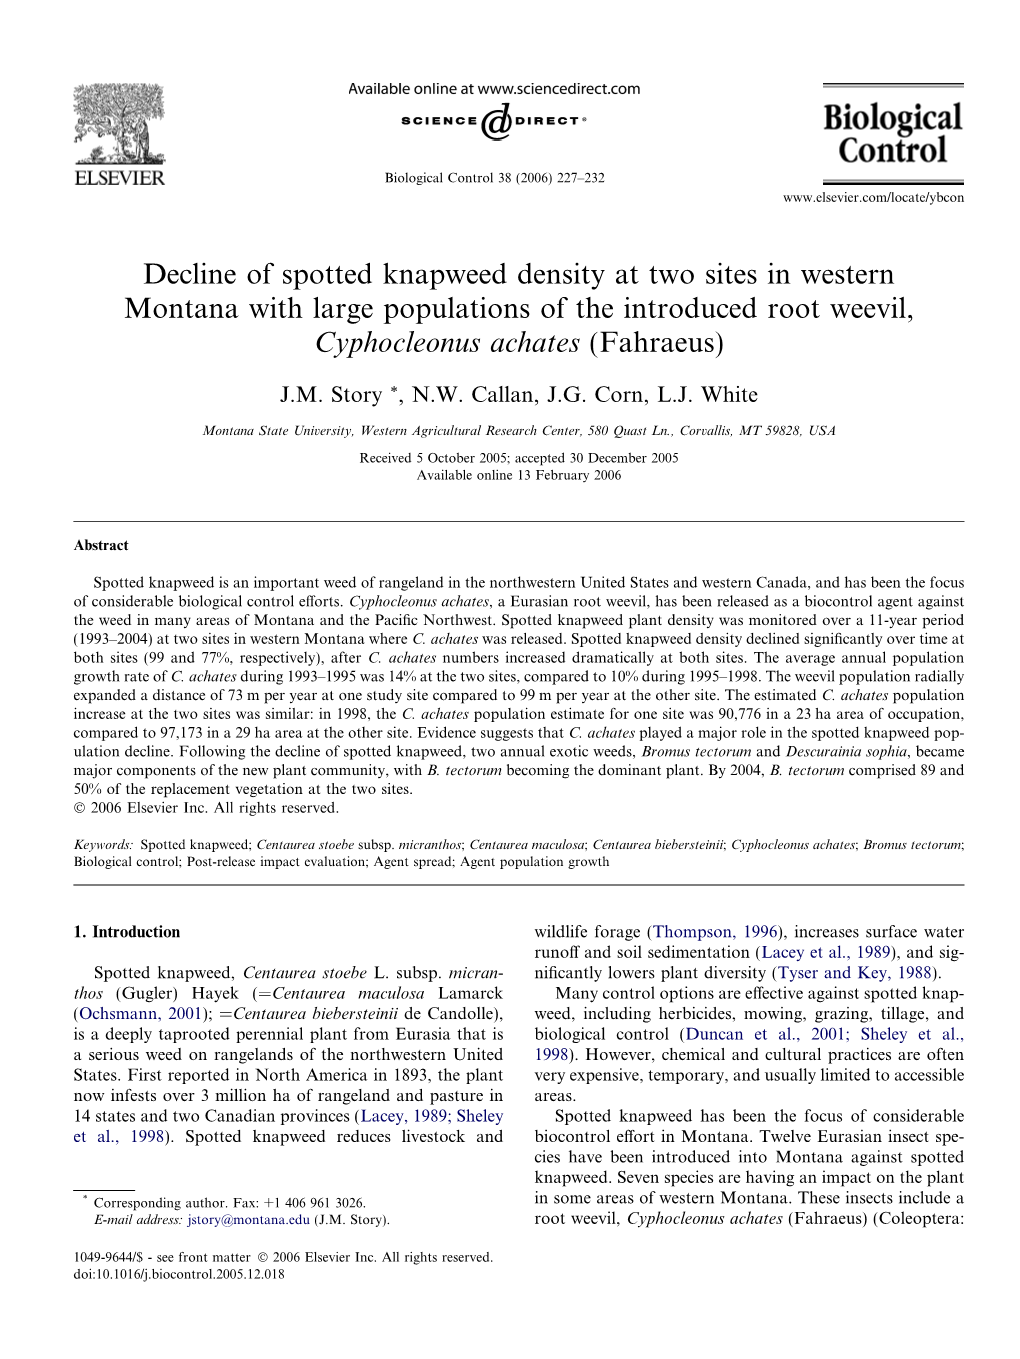 Decline of Spotted Knapweed Density at Two Sites in Western Montana with Large Populations of the Introduced Root Weevil, Cyphocleonus Achates (Fahraeus)